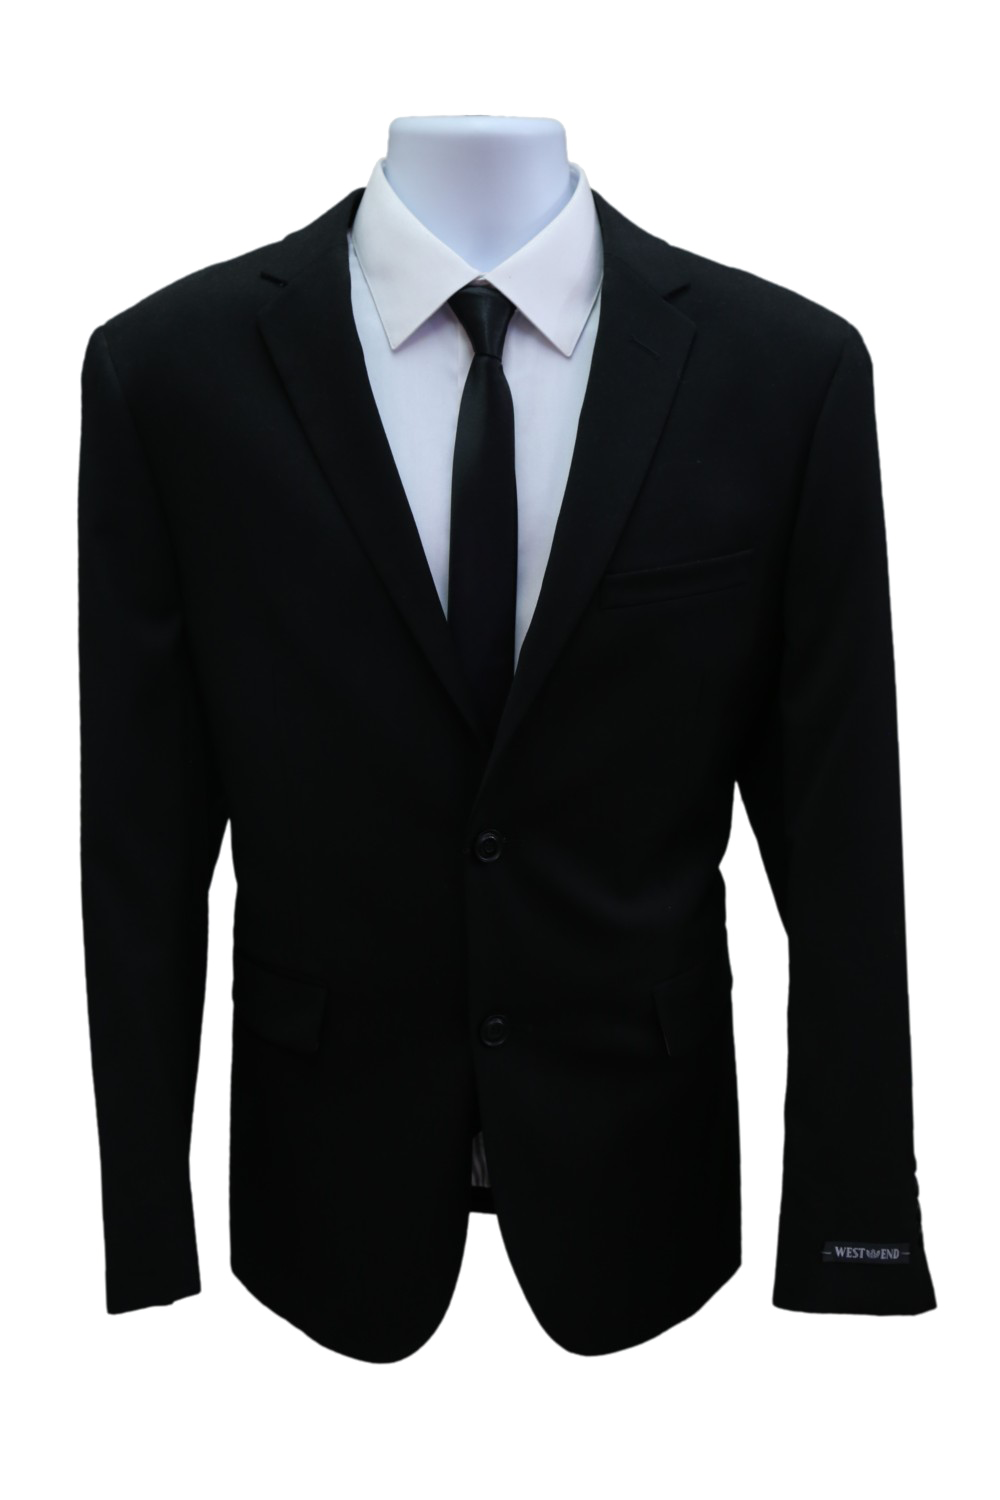 Black suit PNG Background ng Imahe